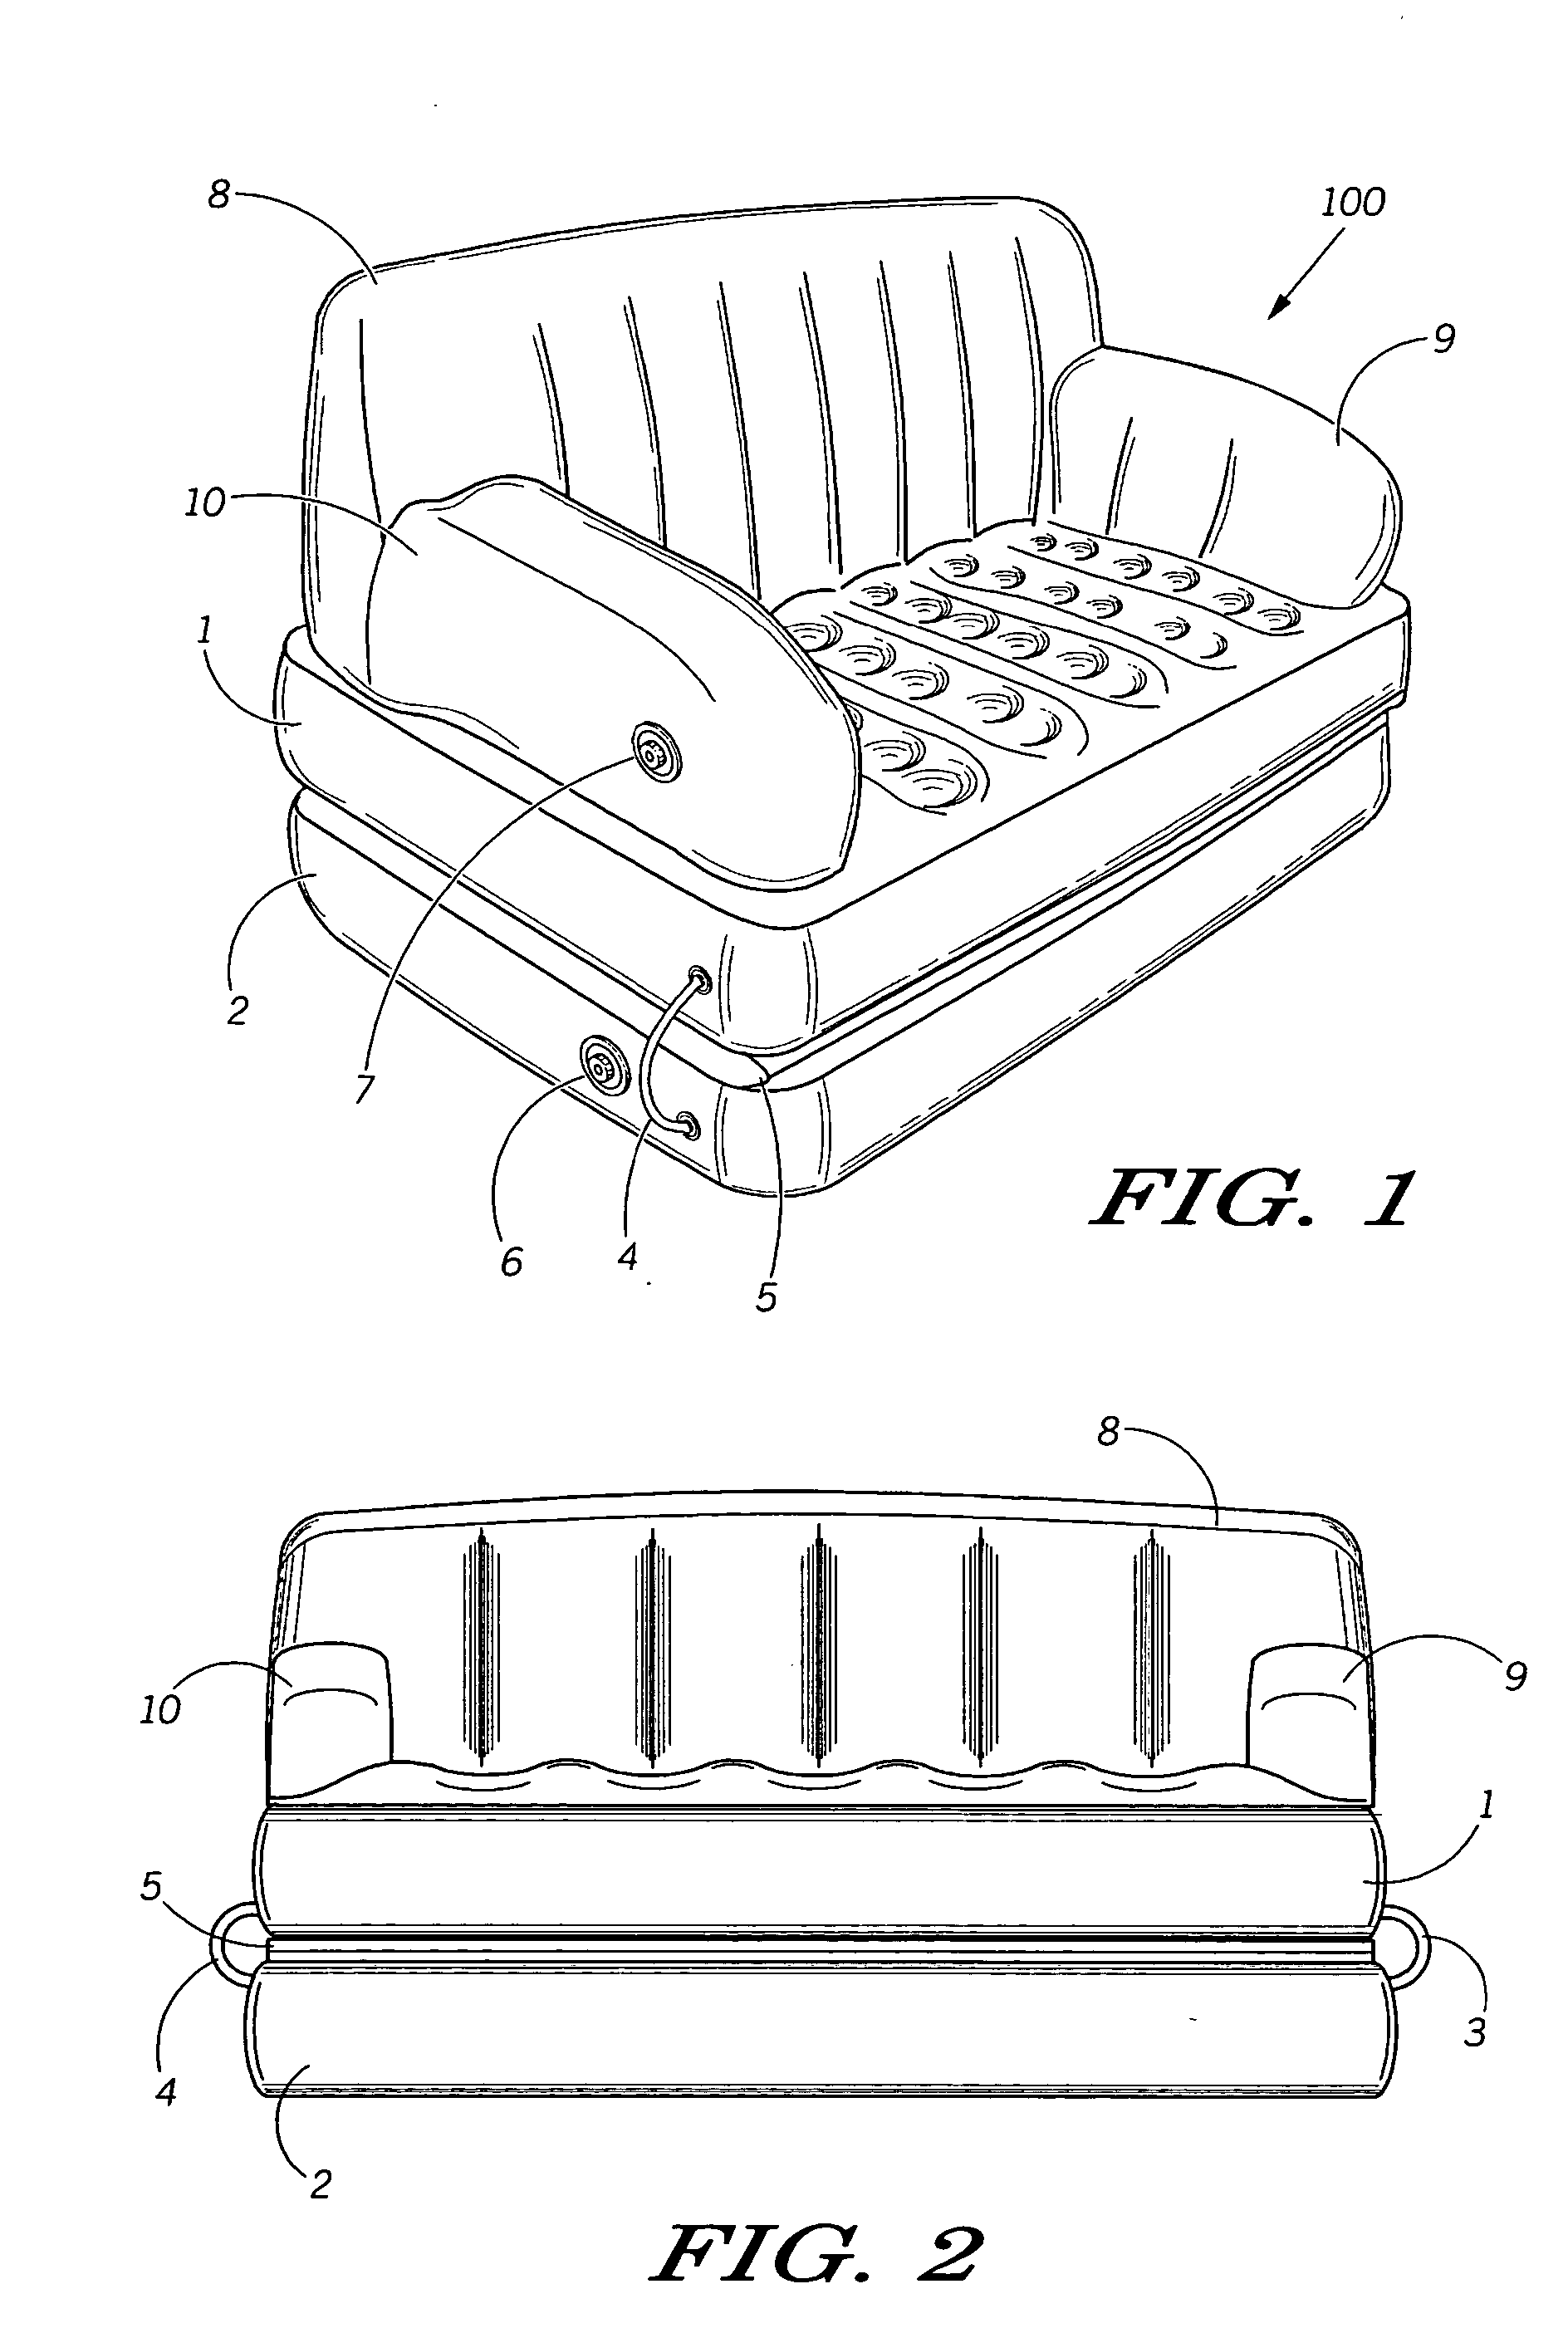 Inflatable article of furniture and method of using same